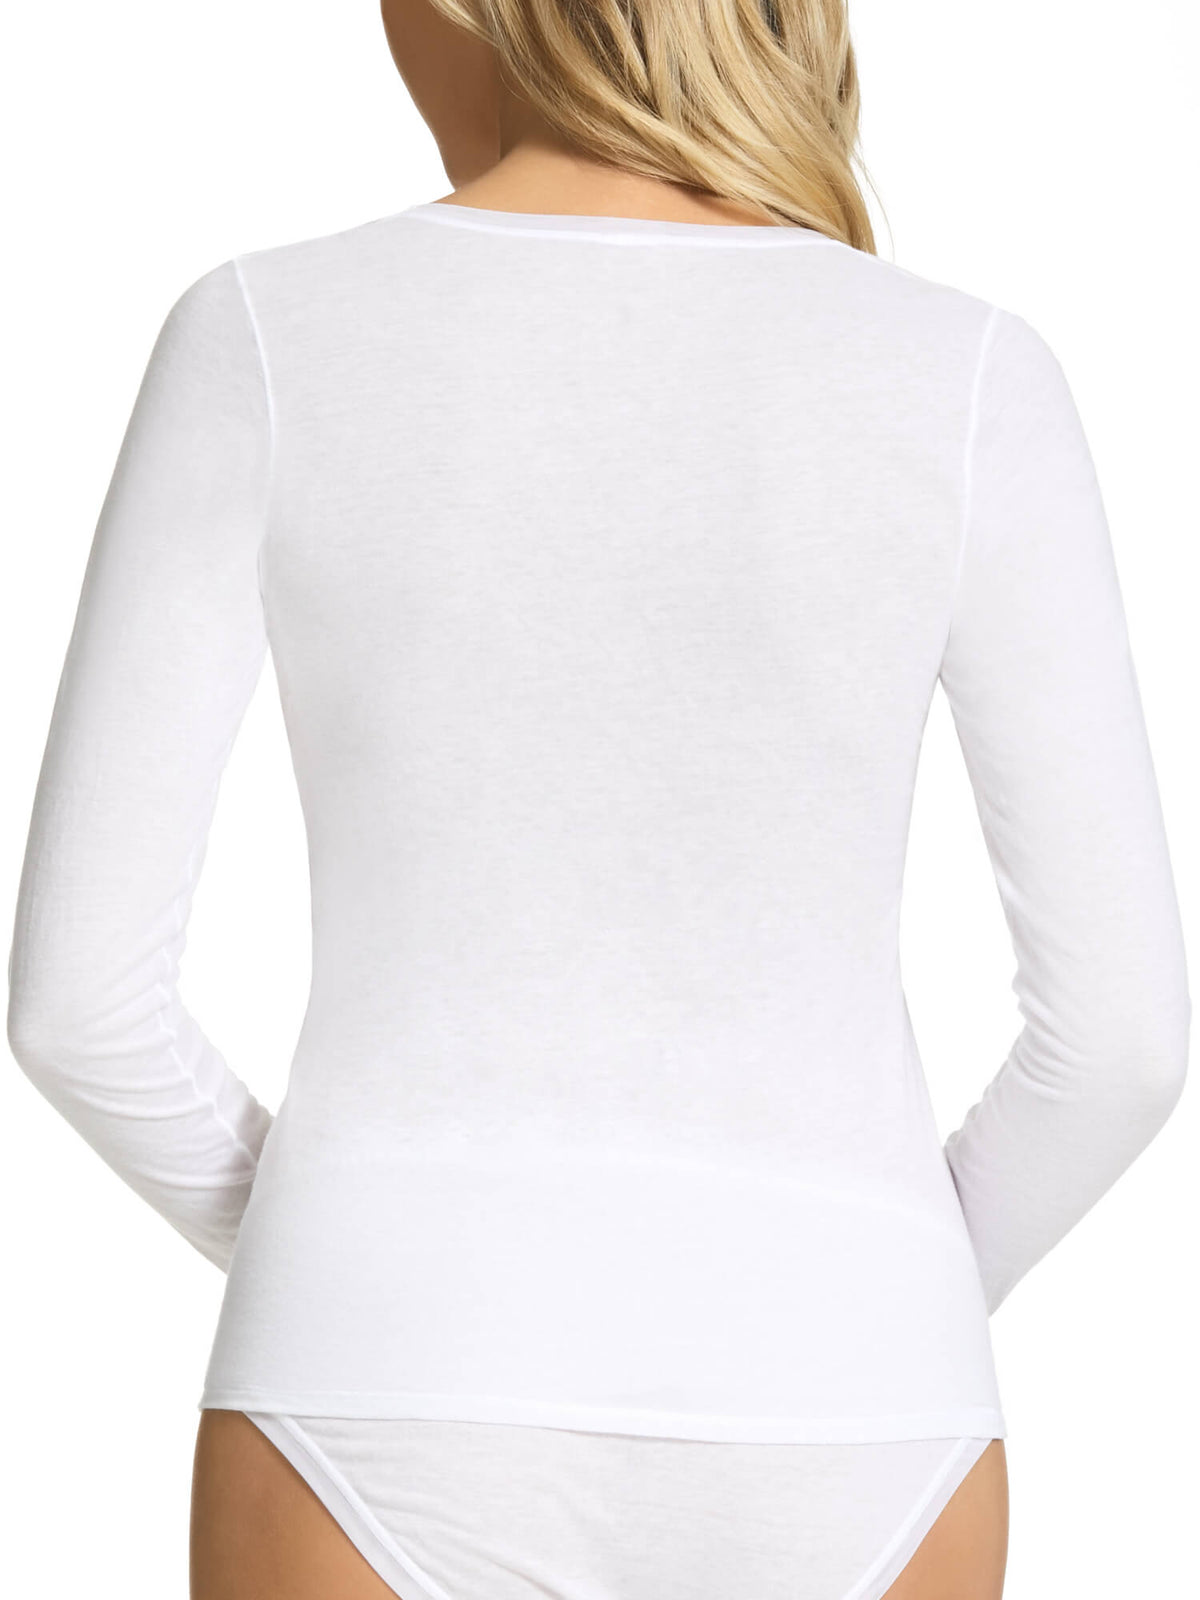 Pure Cotton Long Sleeve Top - White - Kayser Lingerie